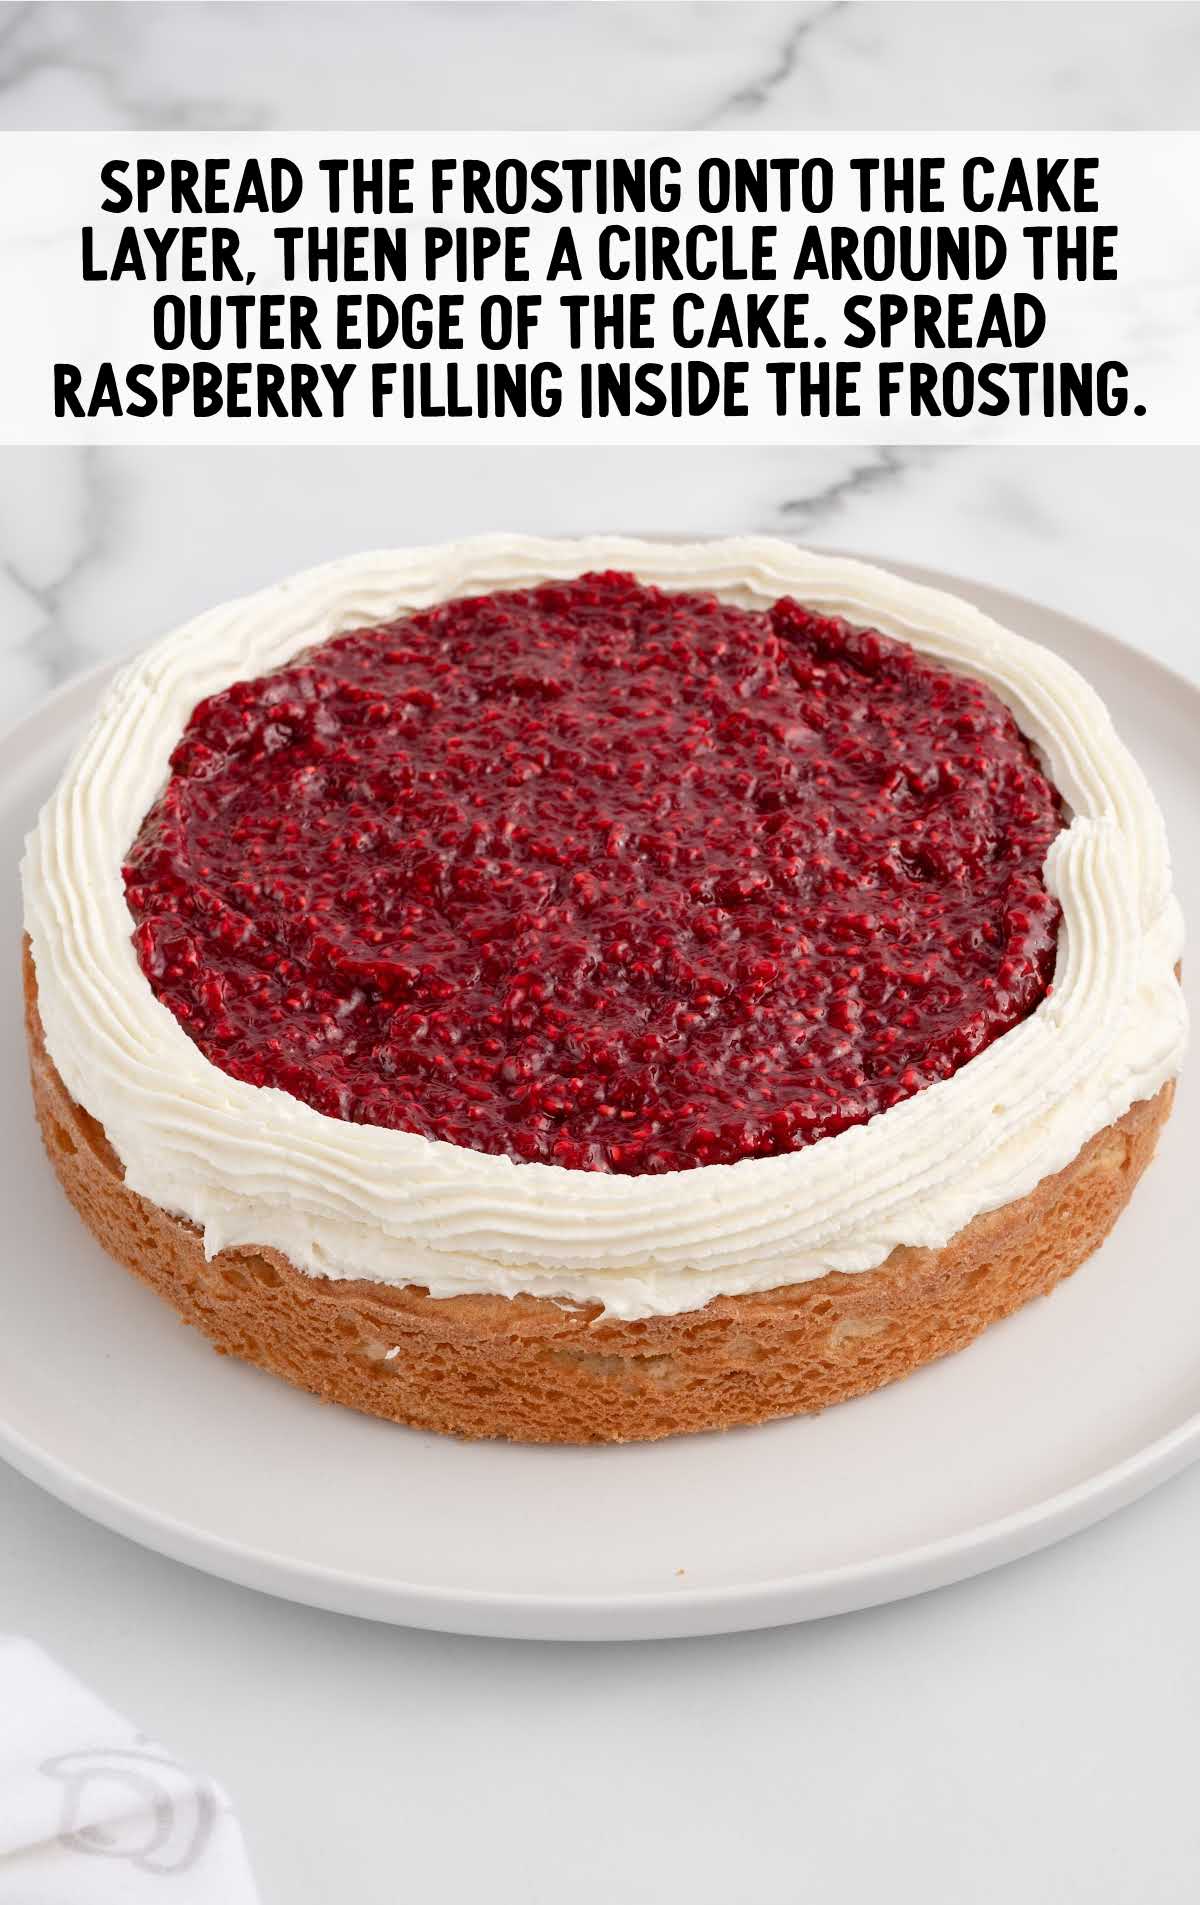 raspberry filing spread inside the frosting